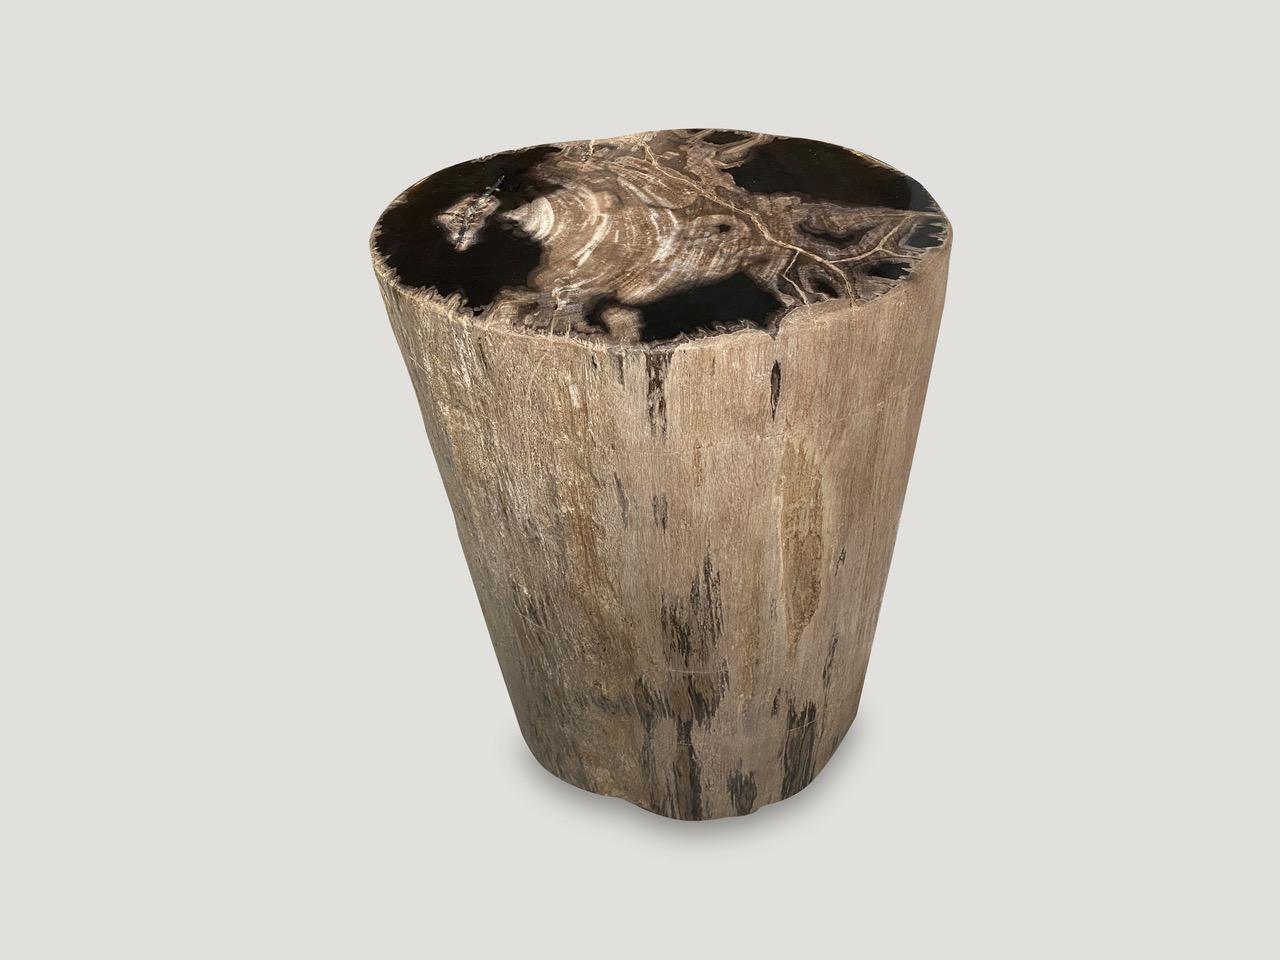 Beautiful earth tones on this high quality petrified wood side table. It’s fascinating how Mother Nature produces these stunning 40 million year old petrified teak logs with such contrasting colors with natural patterns throughout. Modern yet with